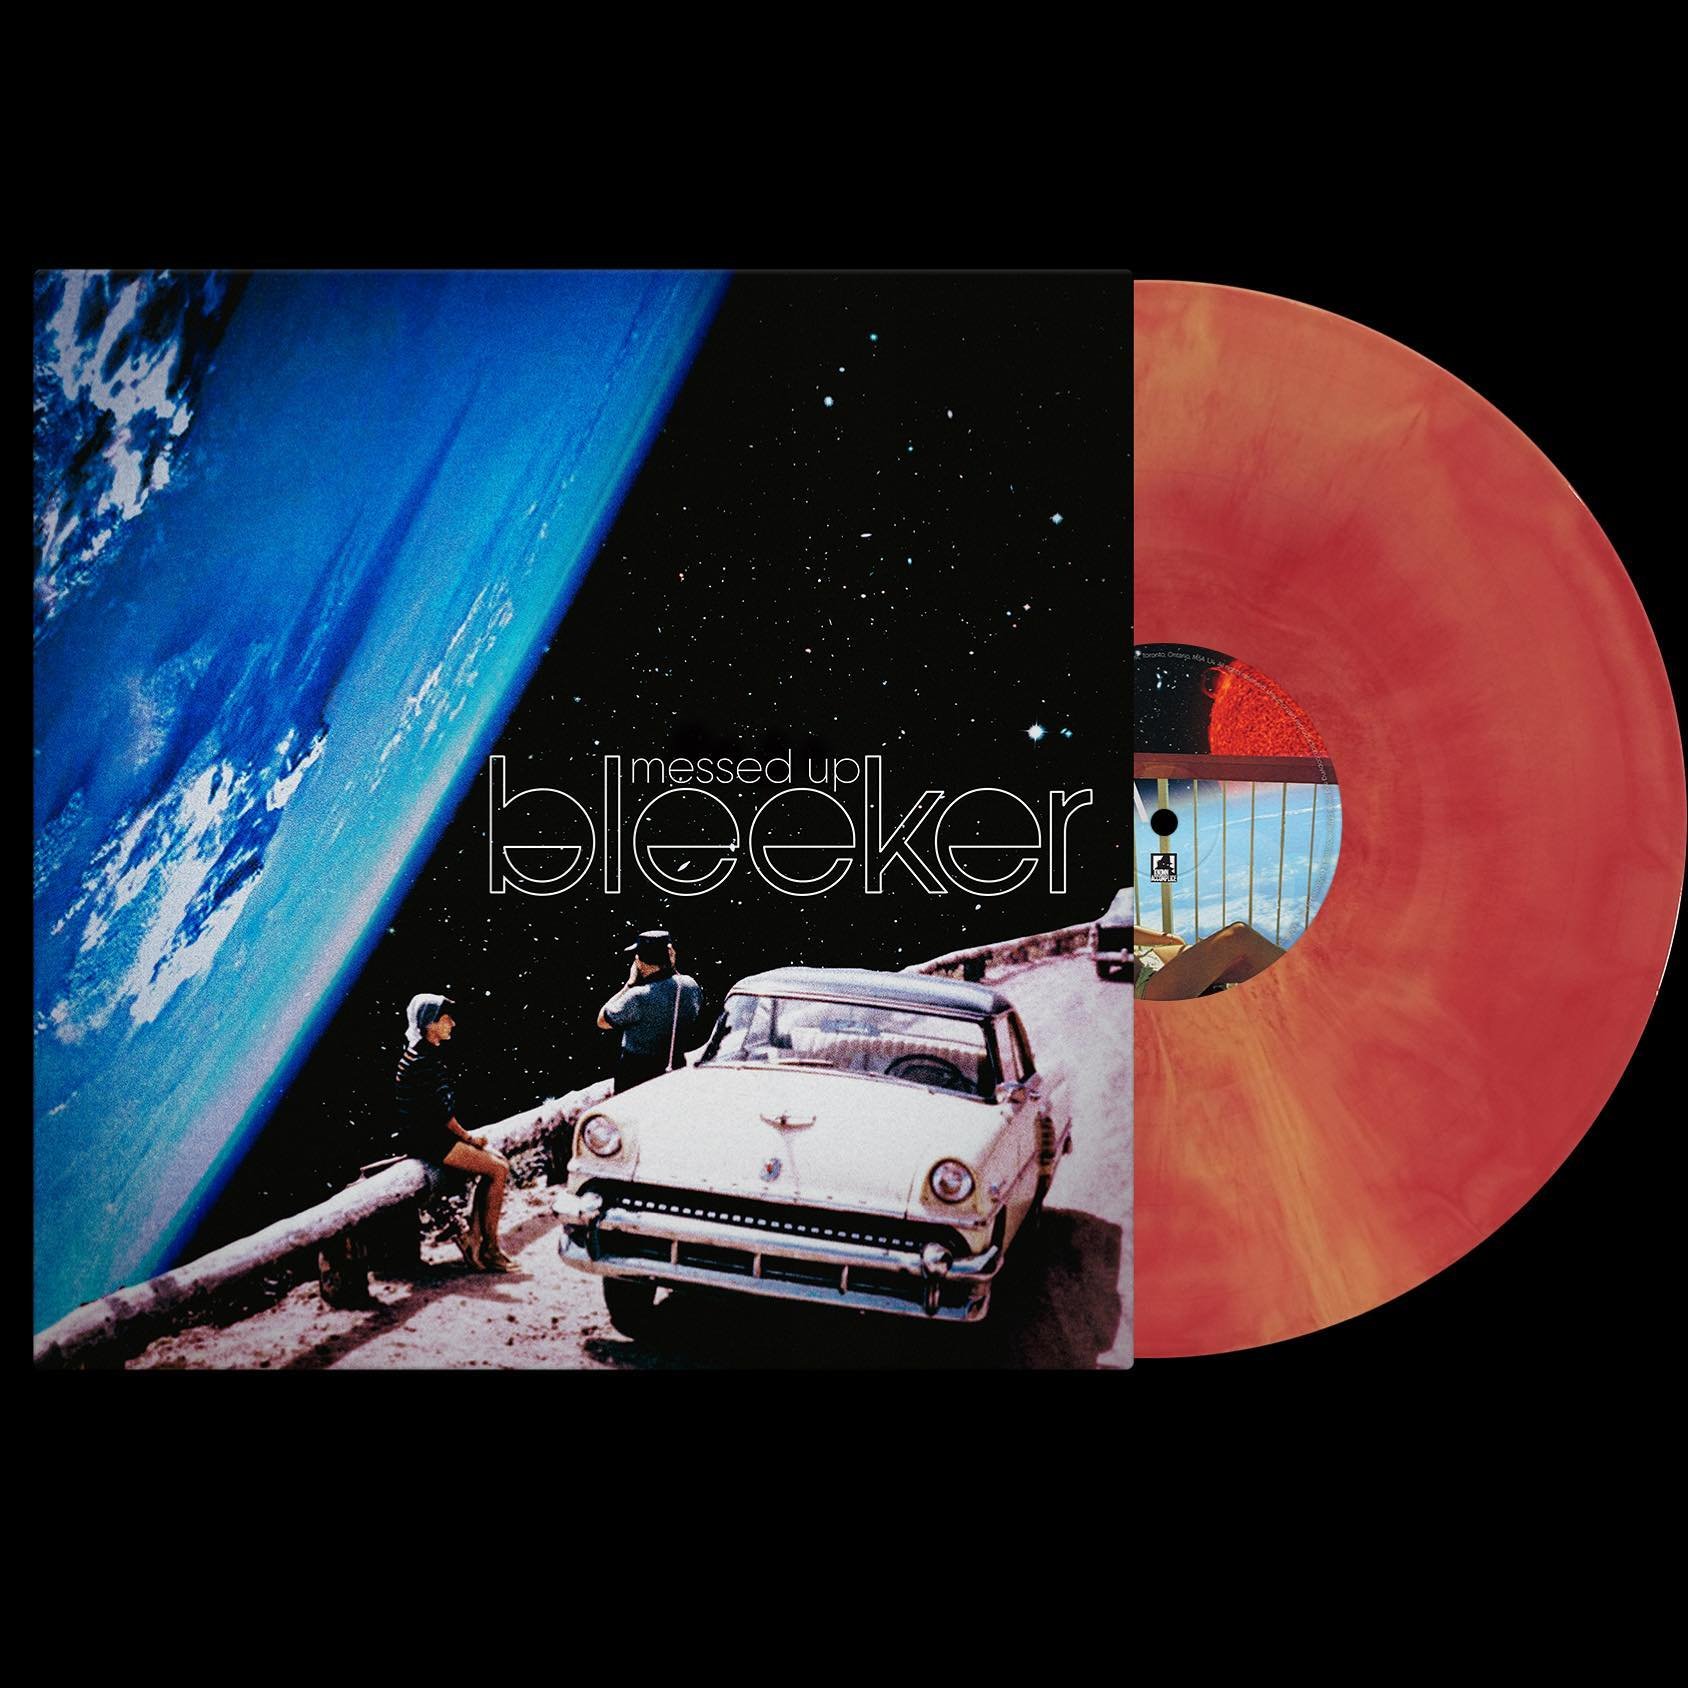 We call this Solar Flare vinyl 😎☀️ It&rsquo;s limited edition so get one before it&rsquo;s gone cause the next pressing won&rsquo;t be nearly as cool as this one.  Pre-order 🔗in bio.

#vinyl #vinylcollection  #preorder #rockandroll